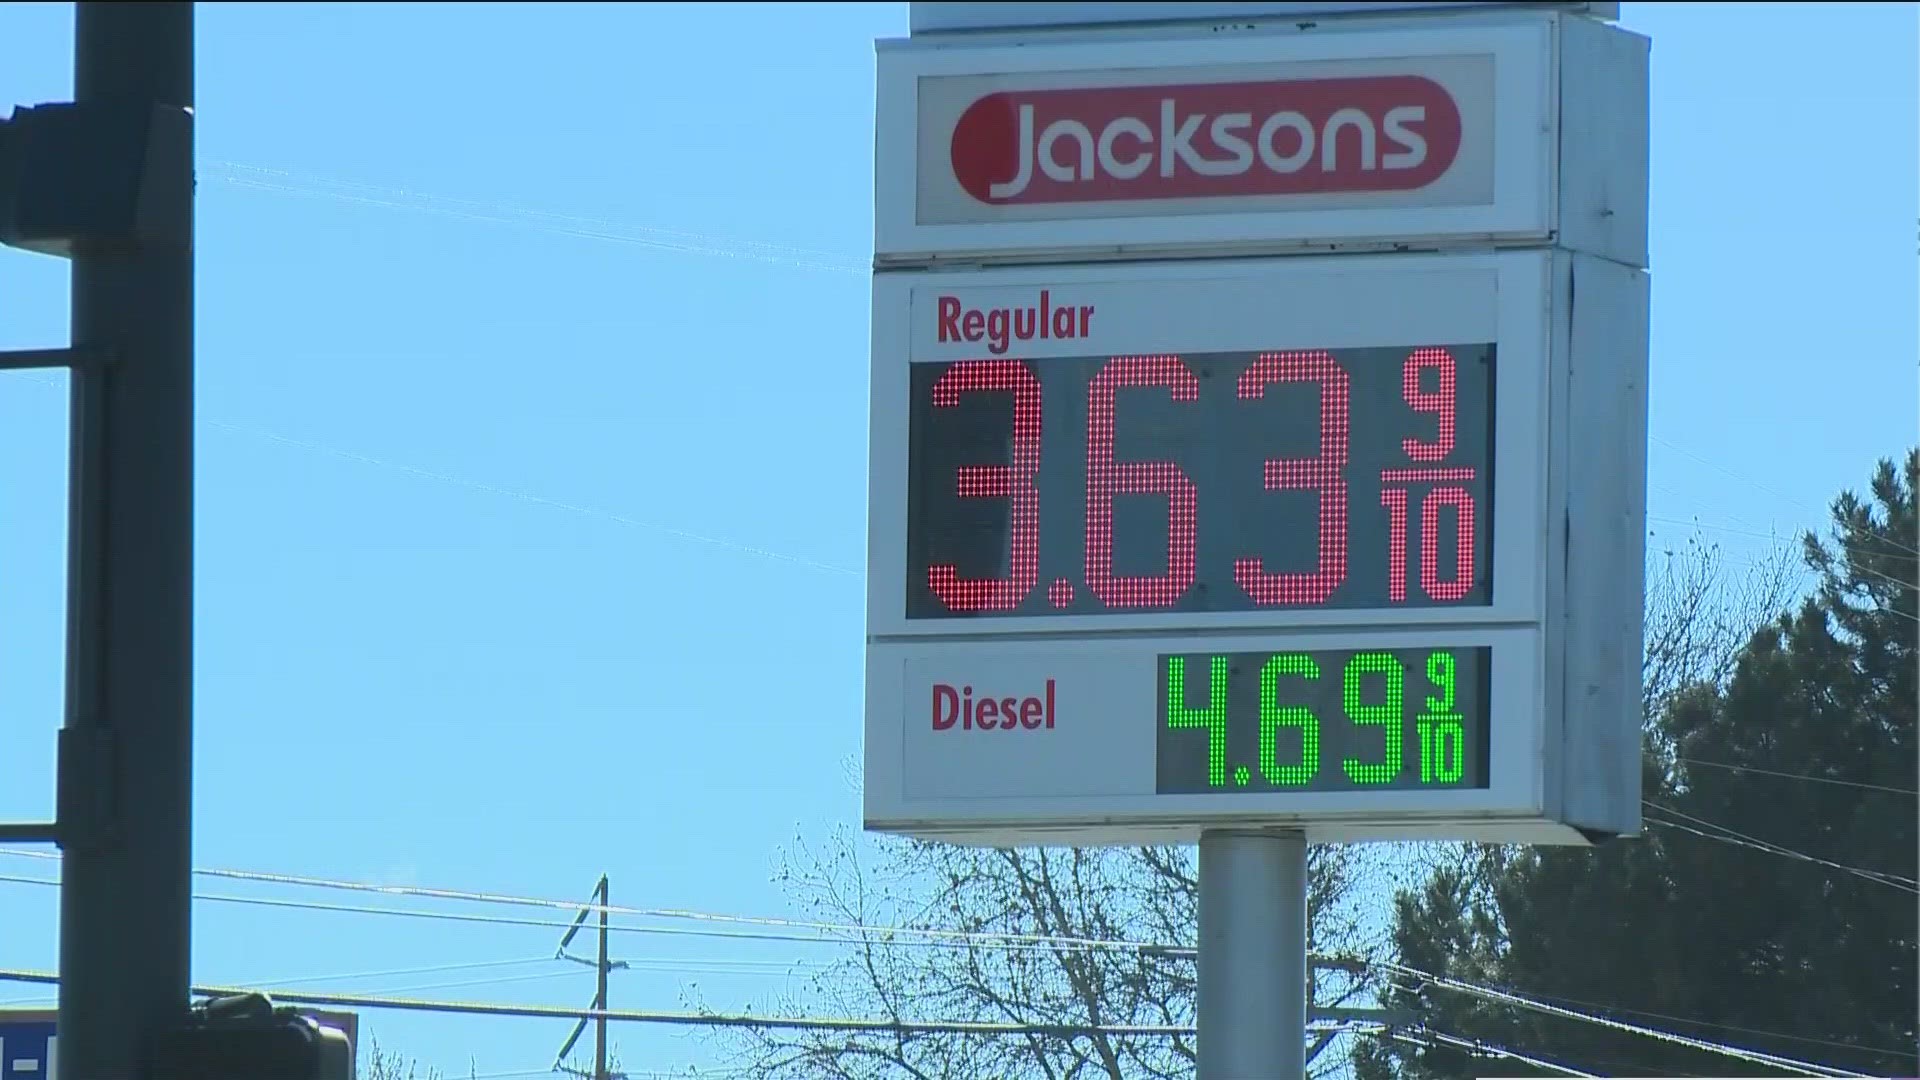 The Pacific Northwest is witnessing inflation at the pump, despite expert suggestion that cheaper gas 'will be on the way soon.'